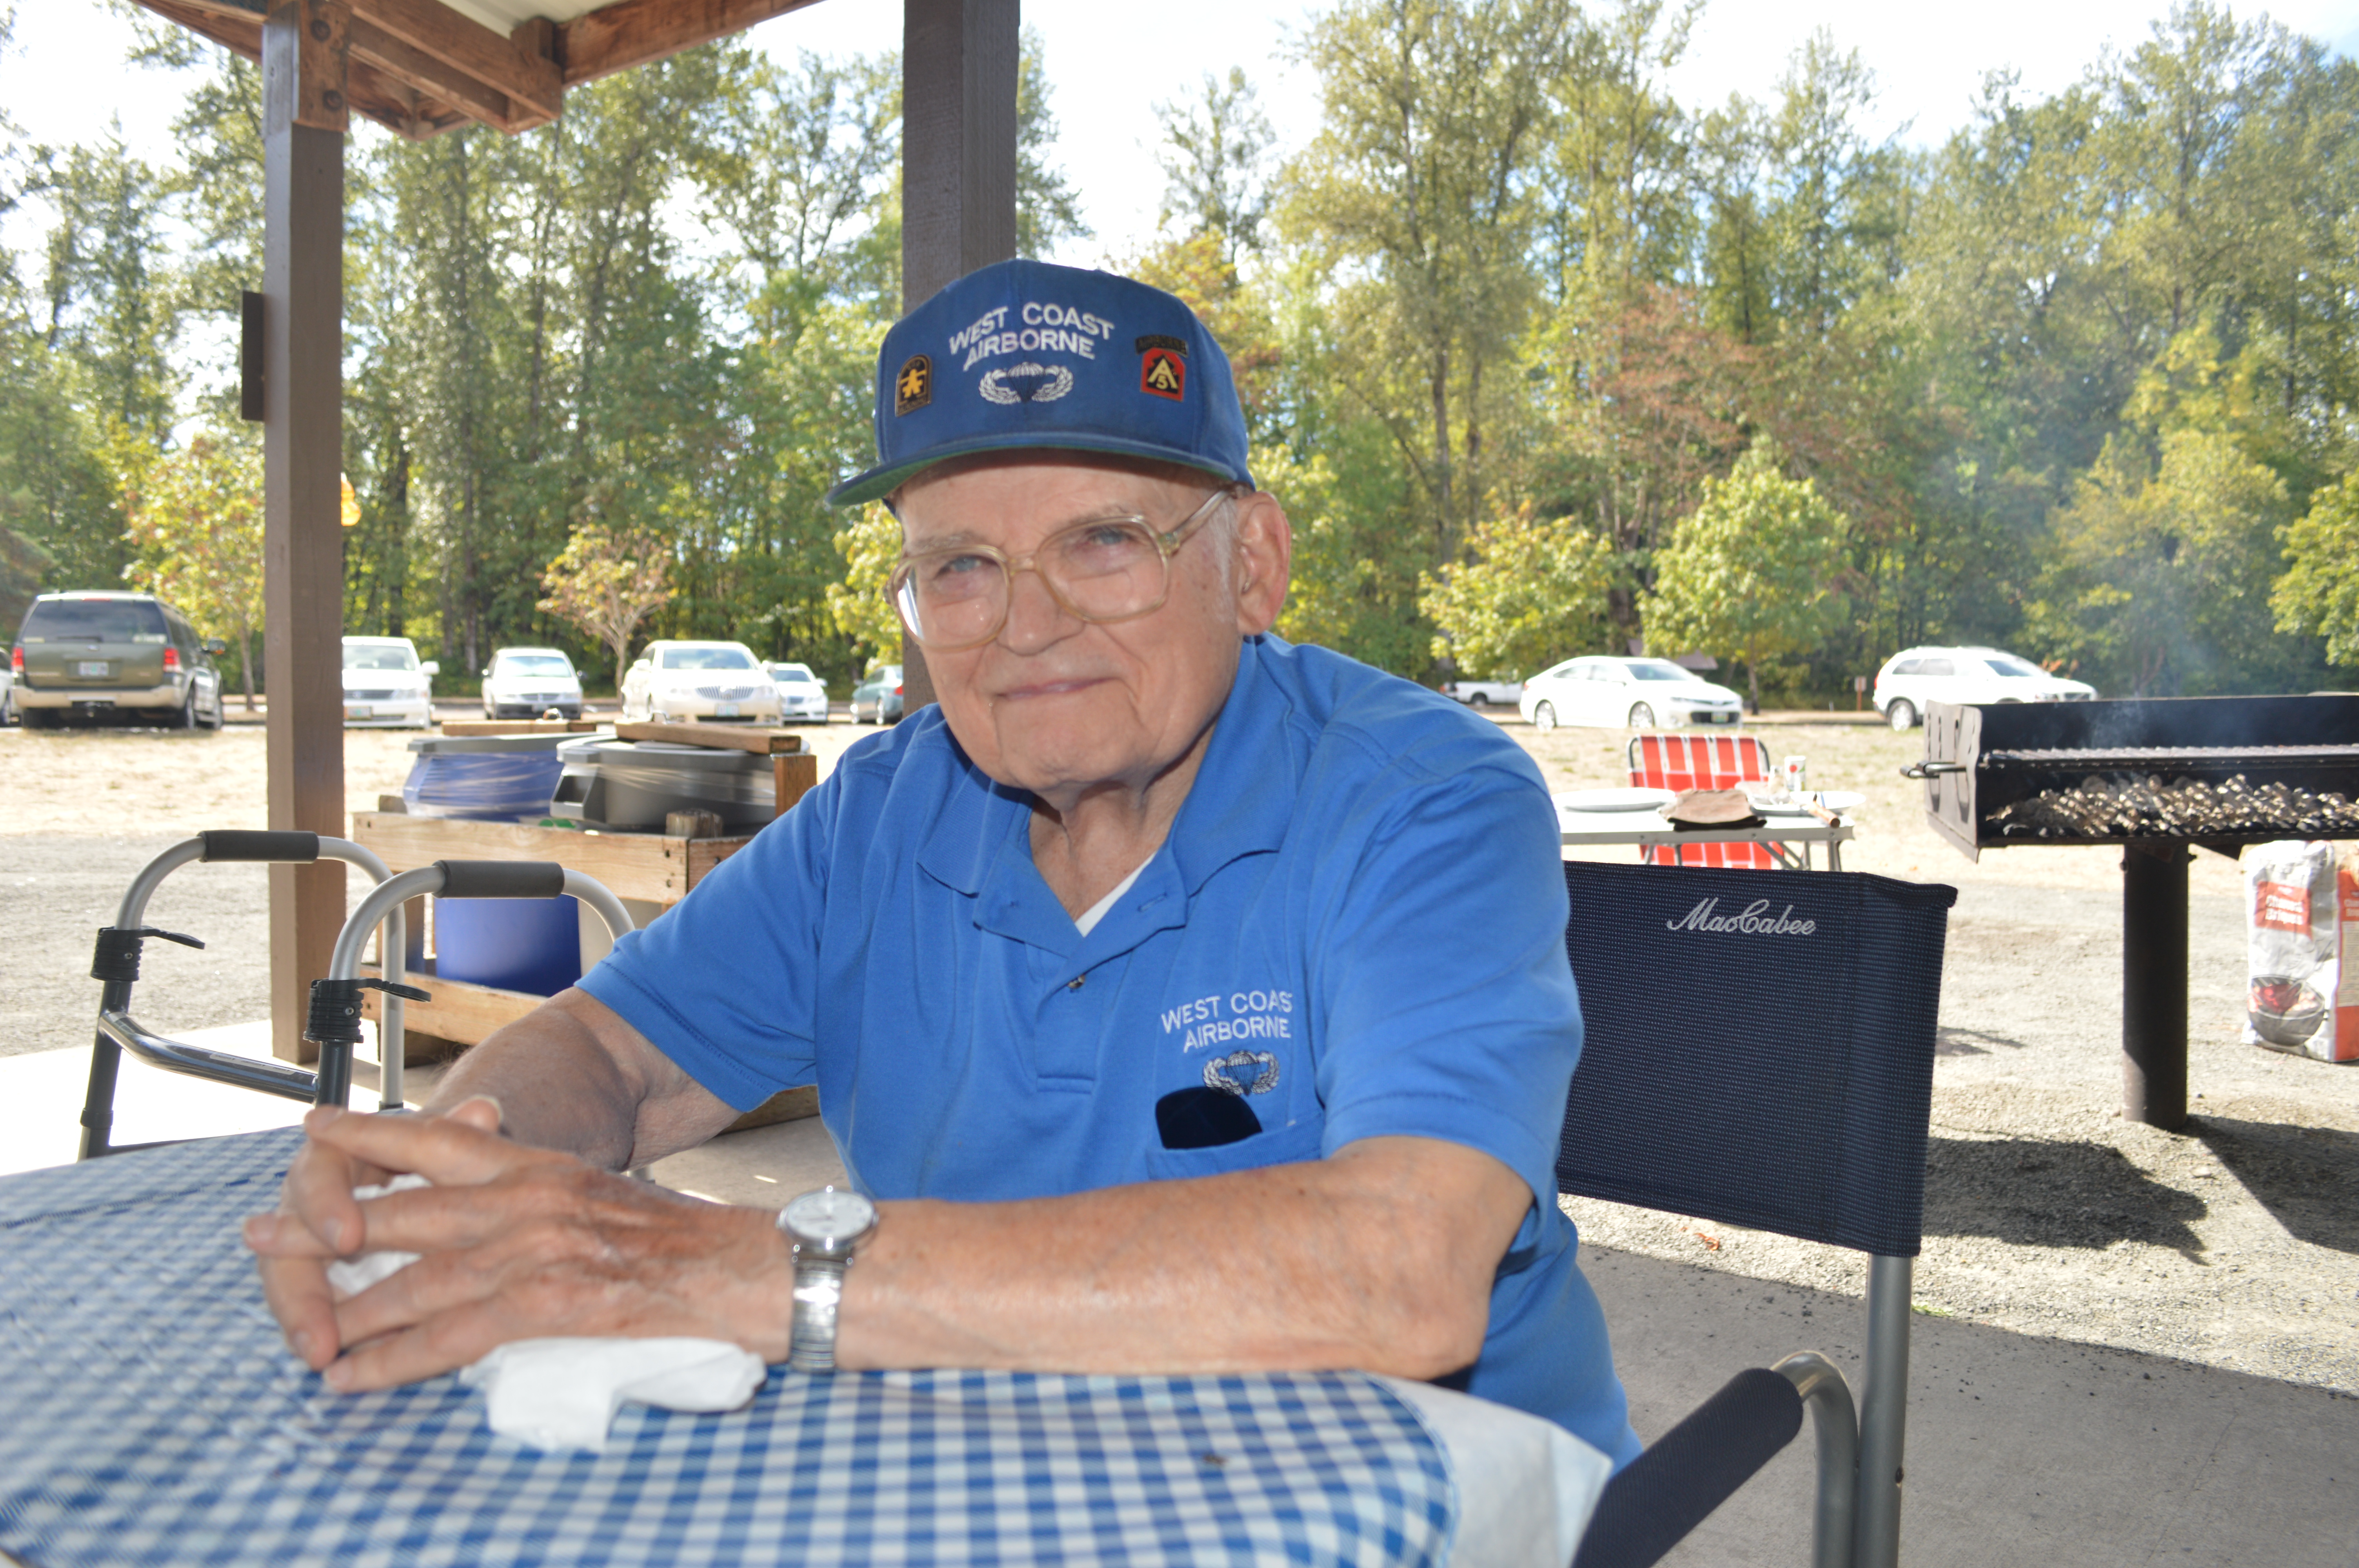 Ninety-three-year-old Mike Reuter, a retired Lt. Col with the U.S. Army, attended the MOAA picnic for the camaraderie of his fellow officers. In February, Reuter received the Knight of the Legion of Honor, the highest award for soldiers serving in France in World War II. Photo by Vanessa Salvia.